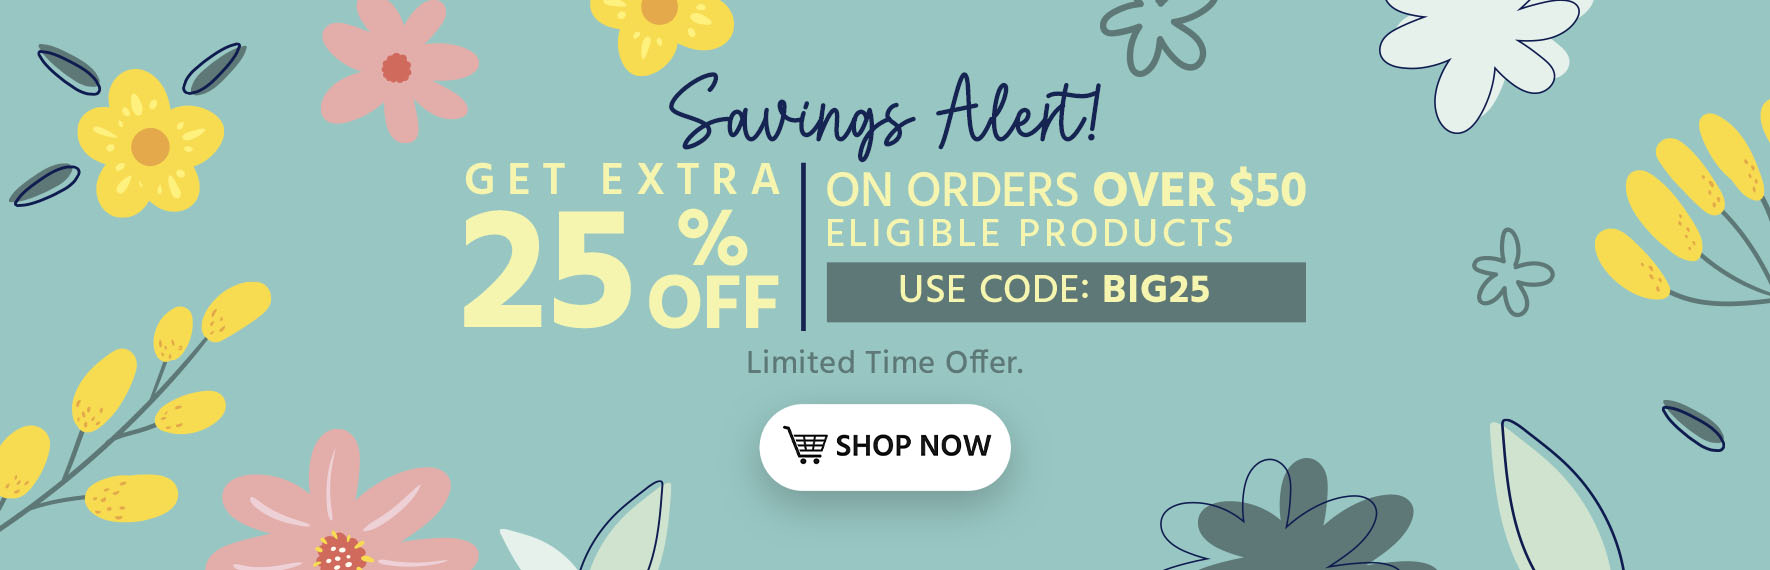 Savings Alert! Get extra 25% off orders of $50+ eligible products! Use code:  BIG25 Limited Time Offer Shop Now